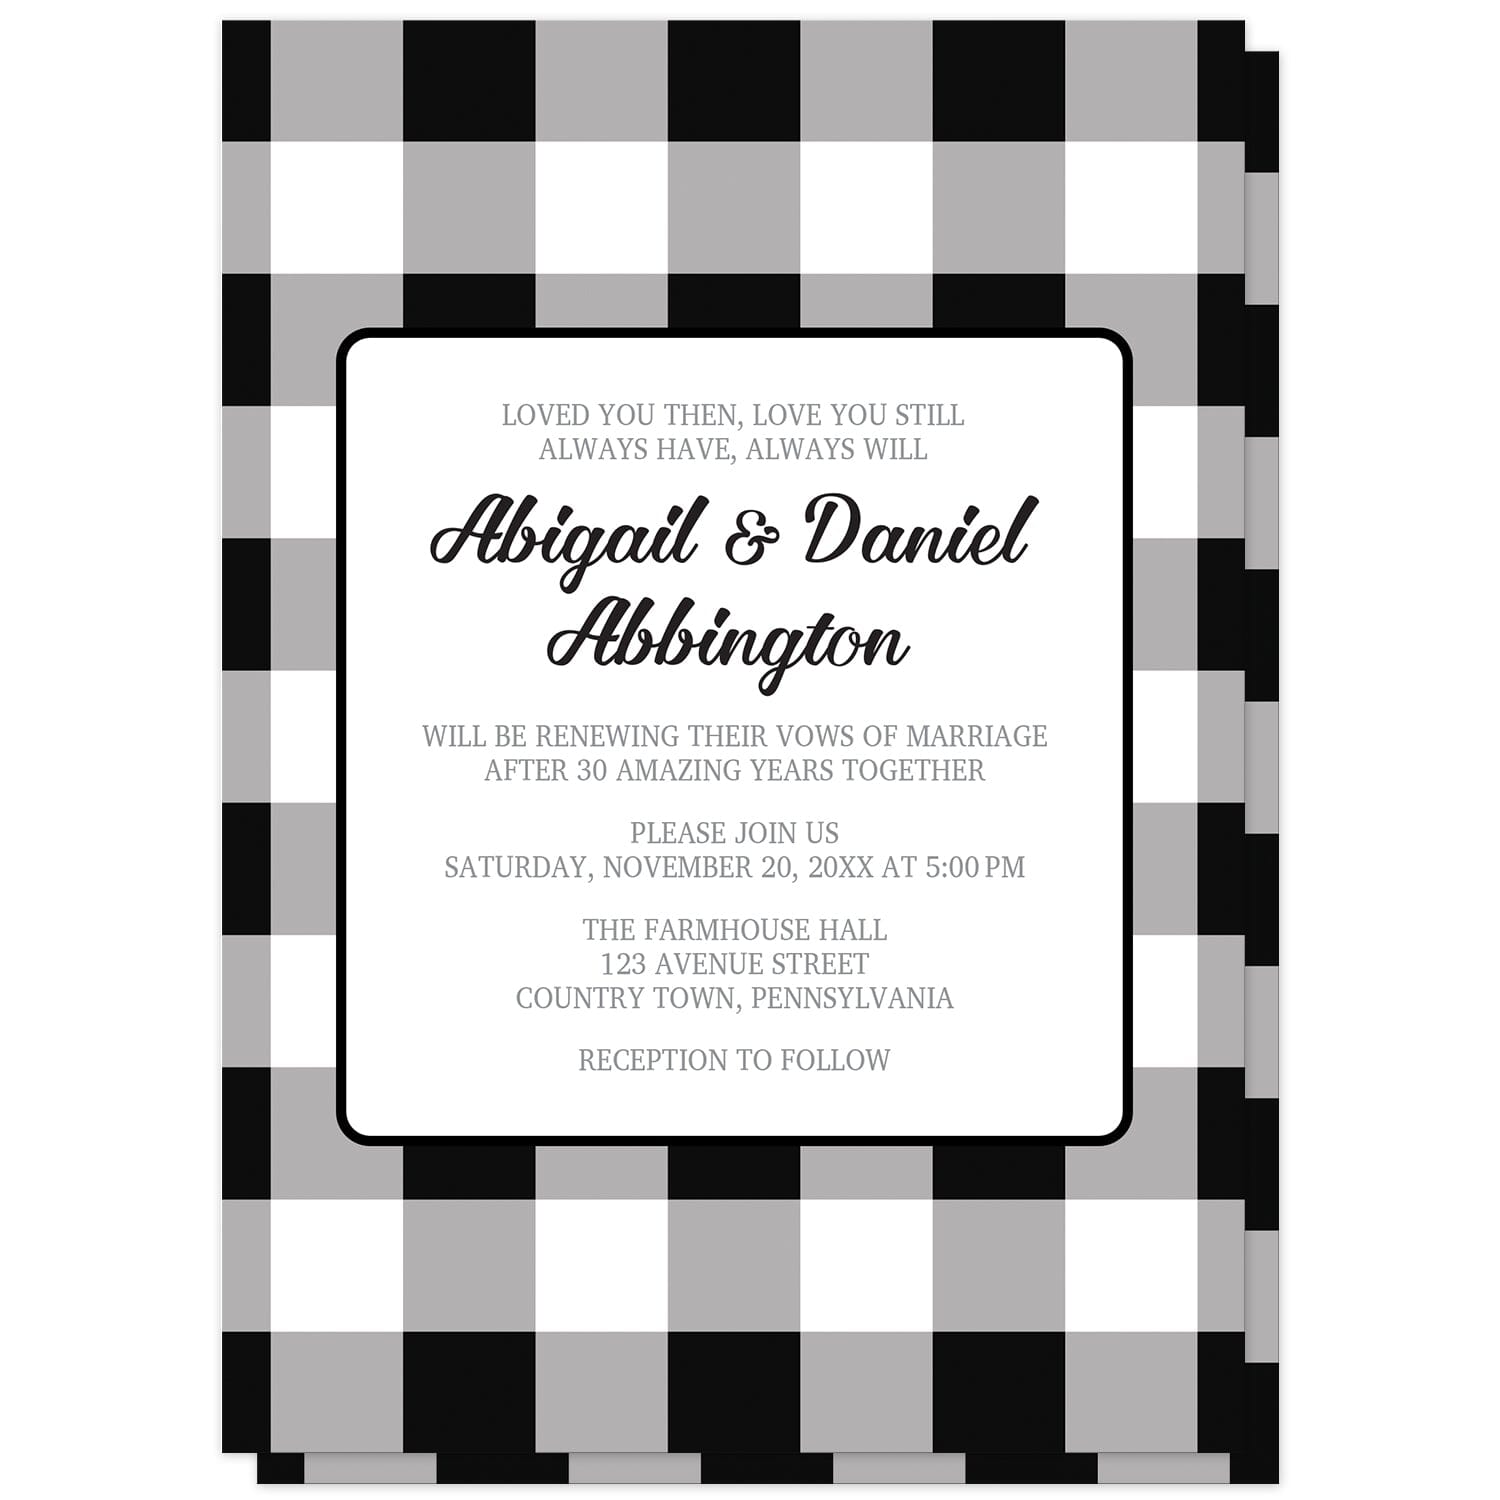 Black and White Buffalo Plaid Vow Renewal Invitations at Artistically Invited. Black and white buffalo plaid vow renewal invitations with a large black and white buffalo plaid (buffalo check) pattern background. Your personalized buffalo plaid vow renewal invitation details are custom printed in black and gray inside a white rectangular area in the middle over the buffalo plaid background design.